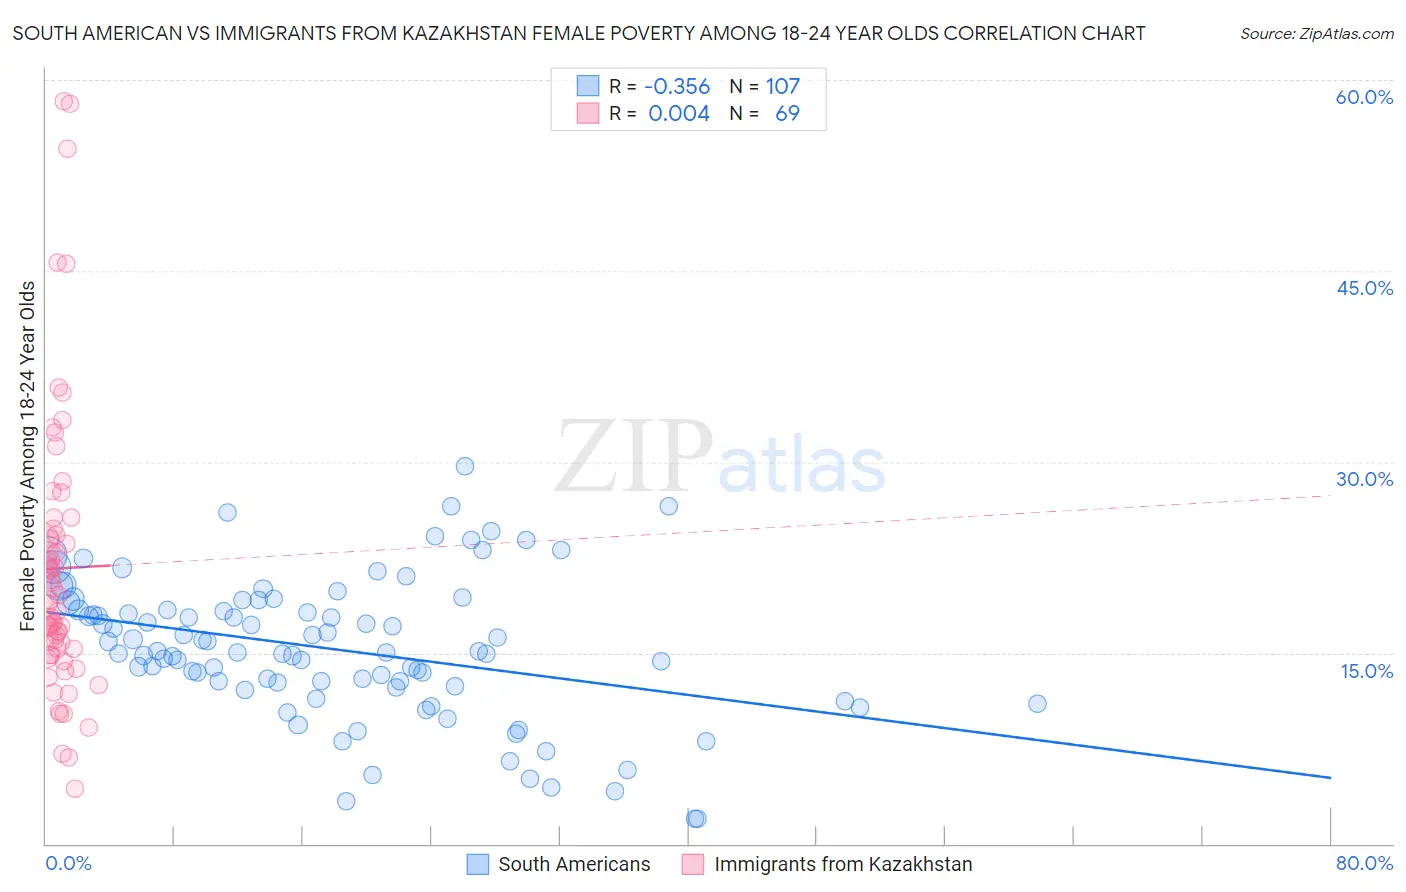 South American vs Immigrants from Kazakhstan Female Poverty Among 18-24 Year Olds